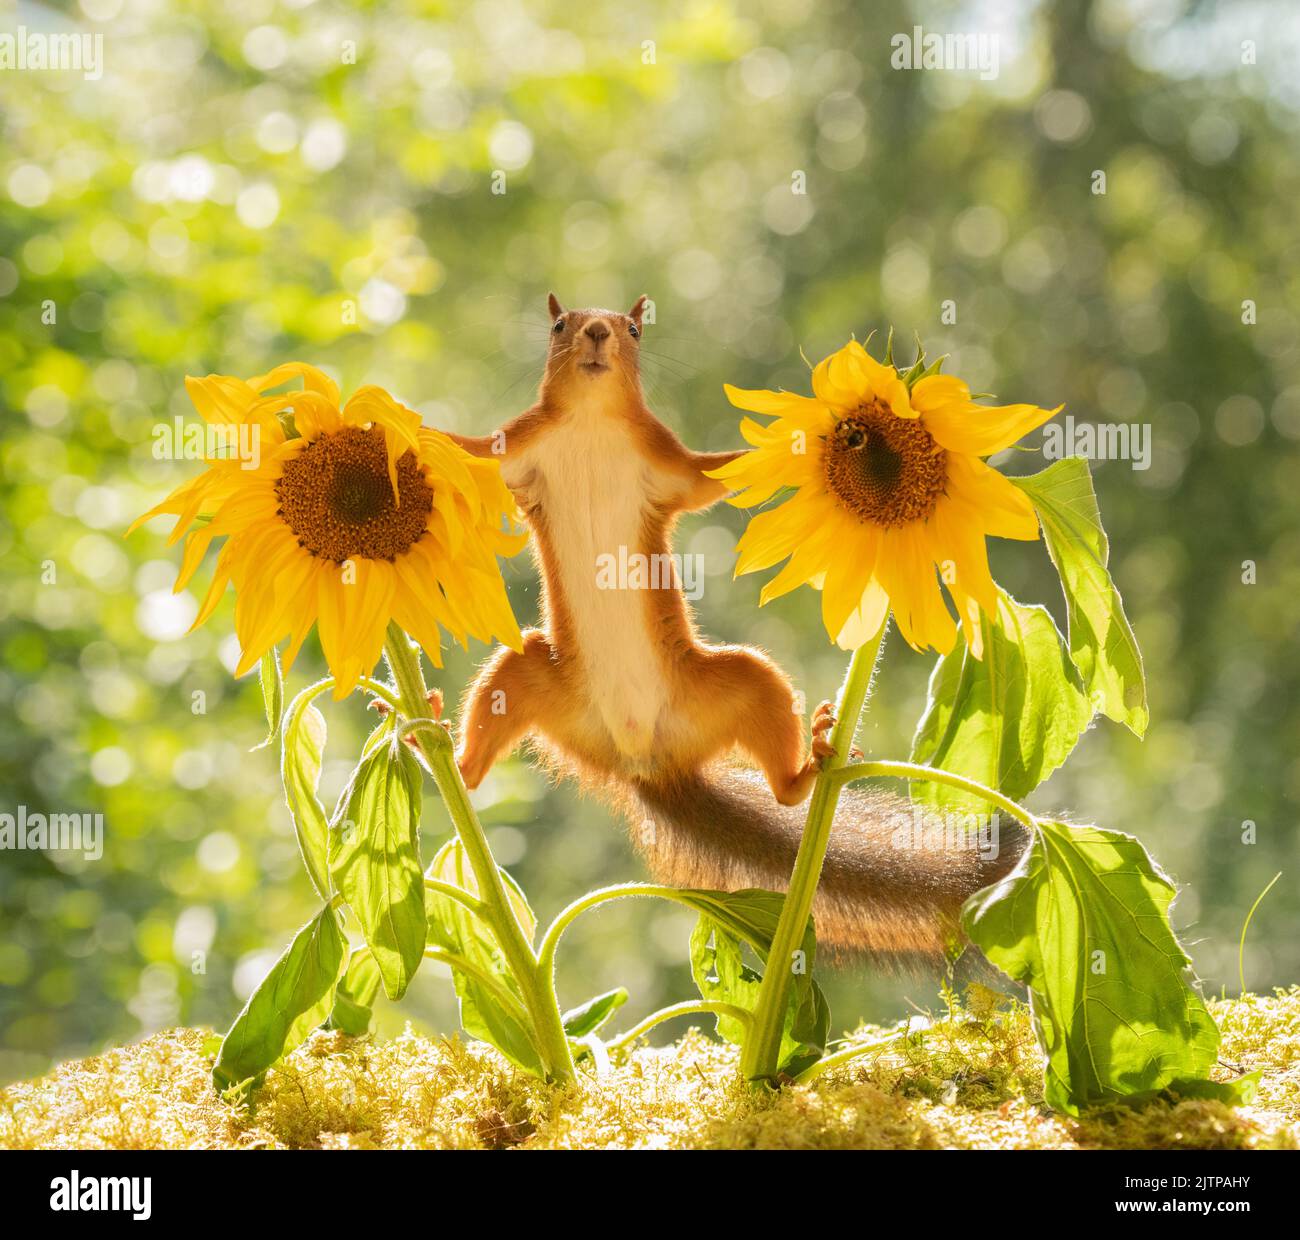 red squirrel between sunflowers Stock Photo